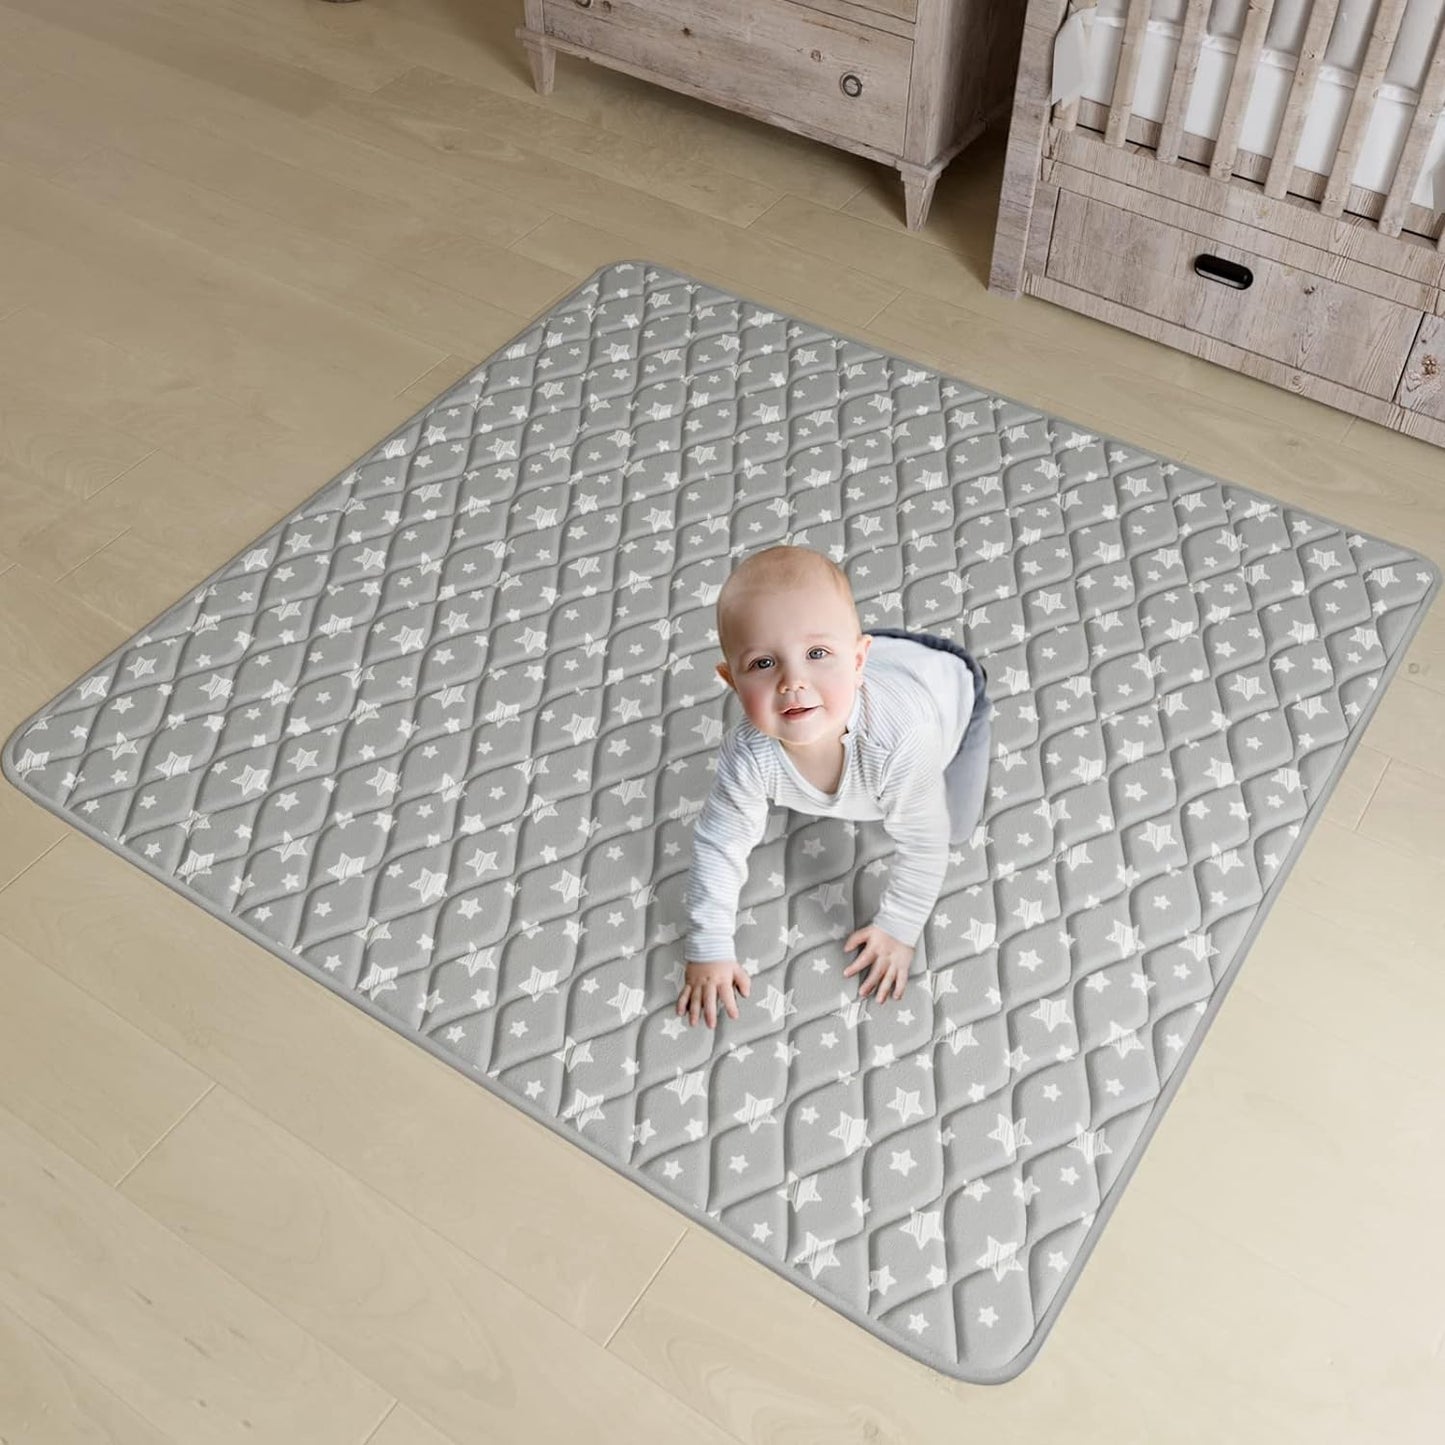 Premium Foam Baby Play Mat | Playpen Mat - 72" x 59", Thicker and Non-Toxic Crawling Mat for Infant & Toddler, Grey Star